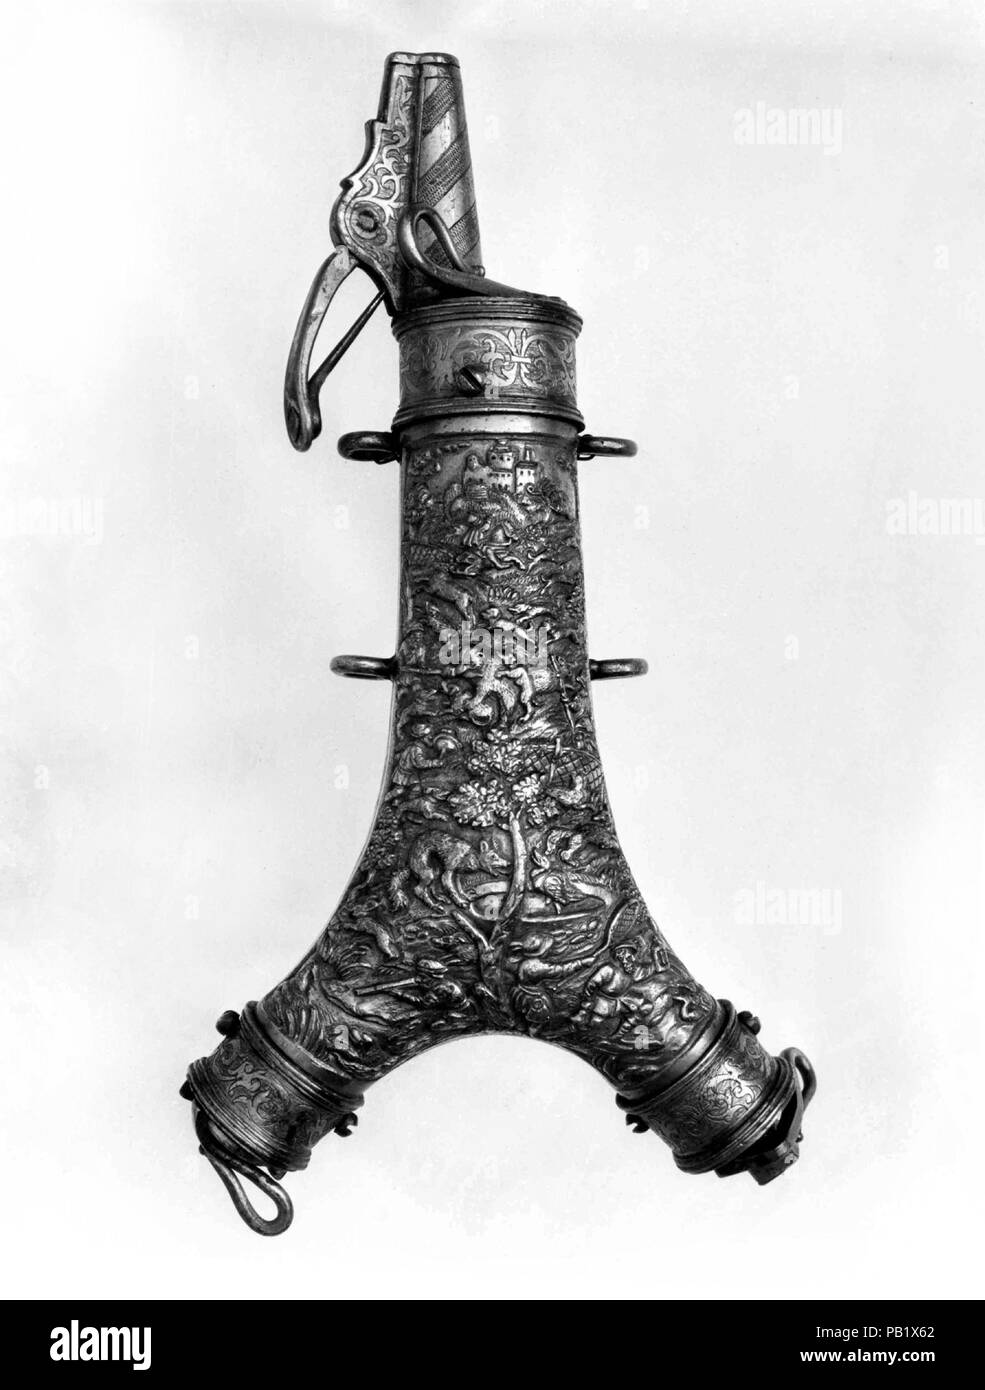 Powder Flask with Spanner, Primer, and Bullet Compartment. Culture: German, Augsburg or Nuremberg. Dimensions: L. 9 1/8 in. (23.2 cm); W. 4 3/4 in. (12.1 cm); Wt. 1 lb. 1 oz. (481.9 g). Date: late 16th century.  The relief decoration on the front includes hunting scenes. The engraving on the back shows the coat of arms of the Bavarian nobleman Hans Albrecht von Closen. Museum: Metropolitan Museum of Art, New York, USA. Stock Photo